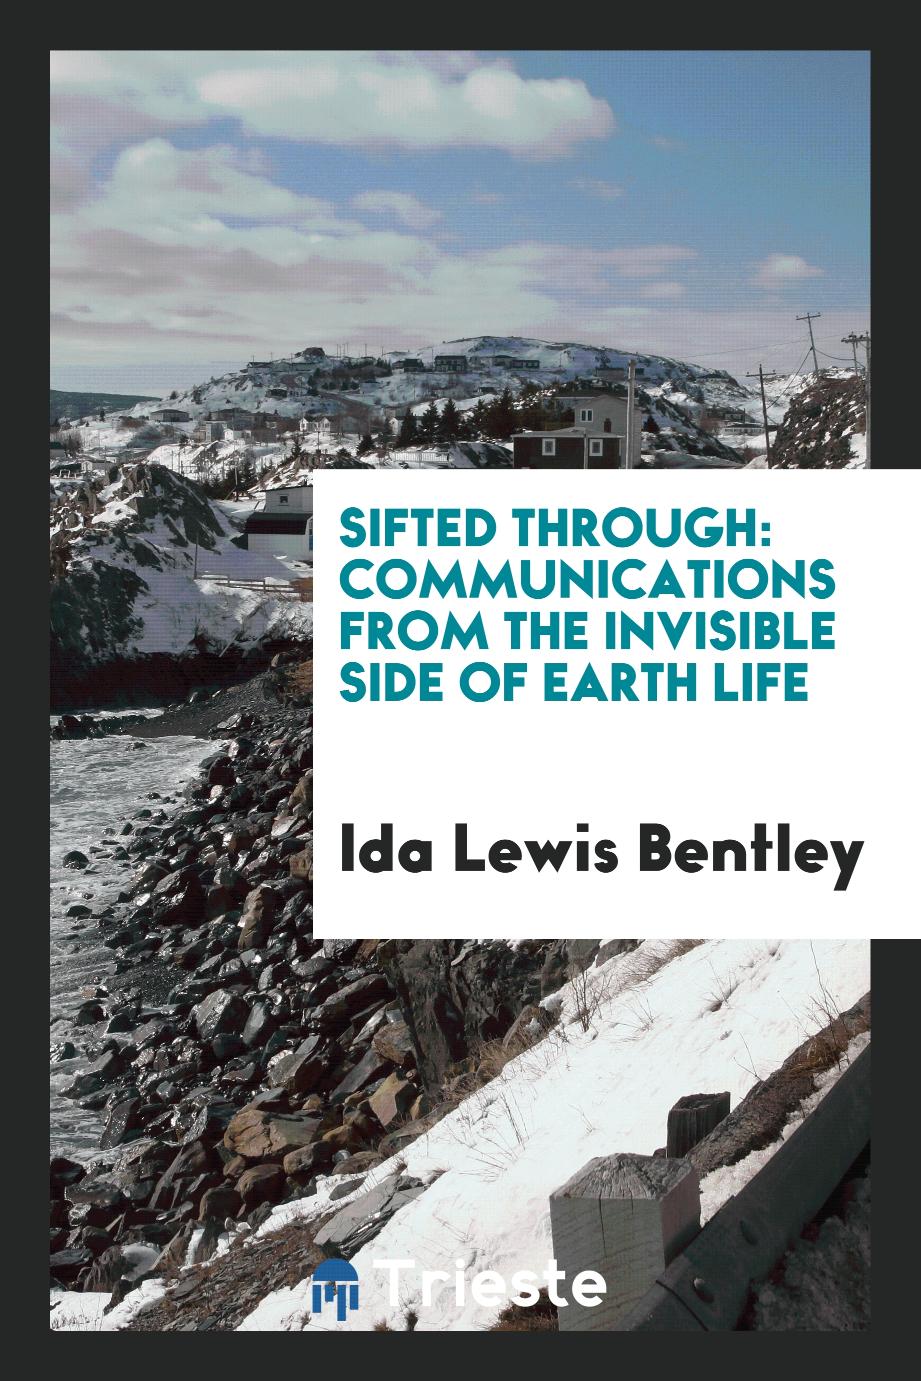 Sifted Through: Communications from the Invisible Side of Earth Life